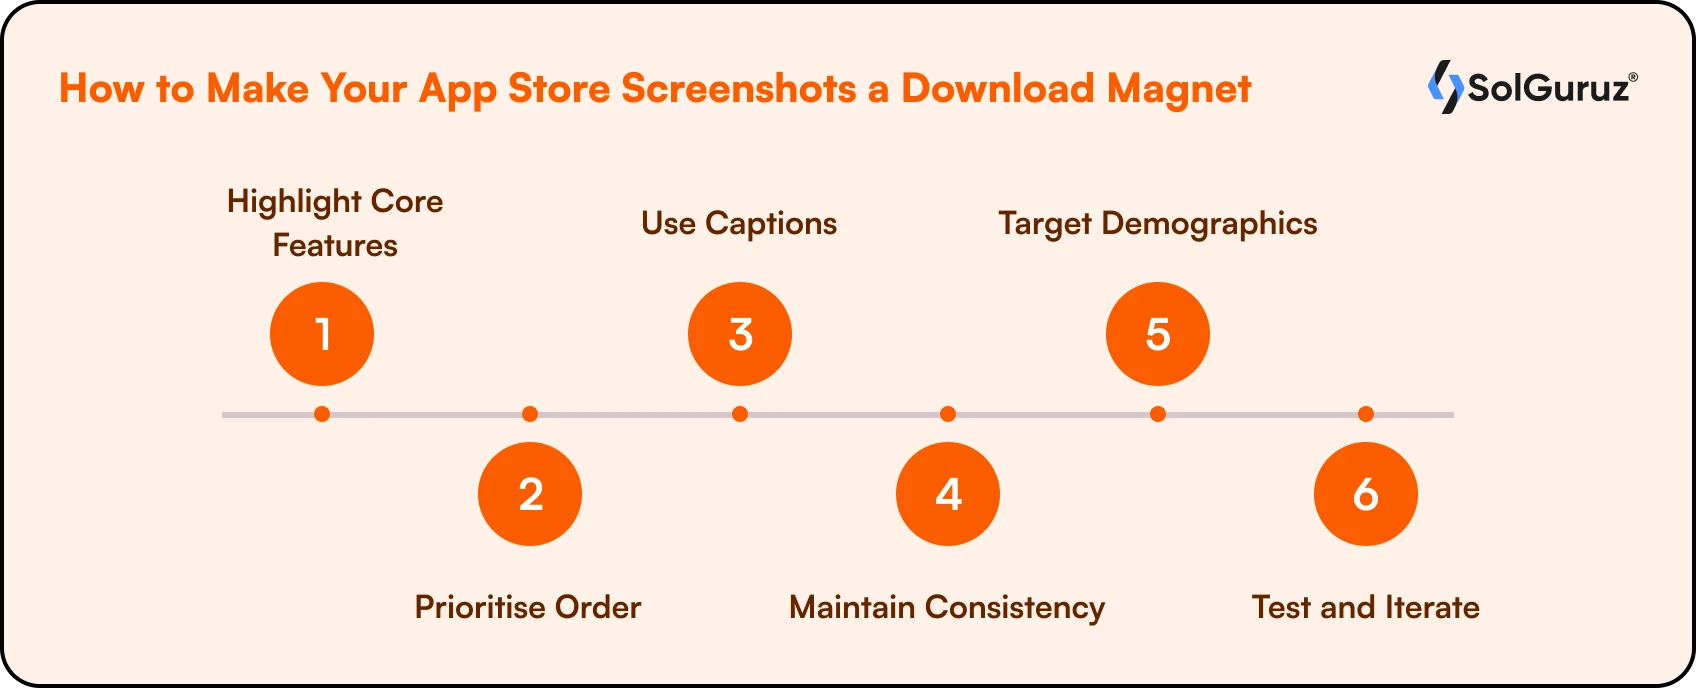 How to Make Your App Store Screenshots a Download Magnet